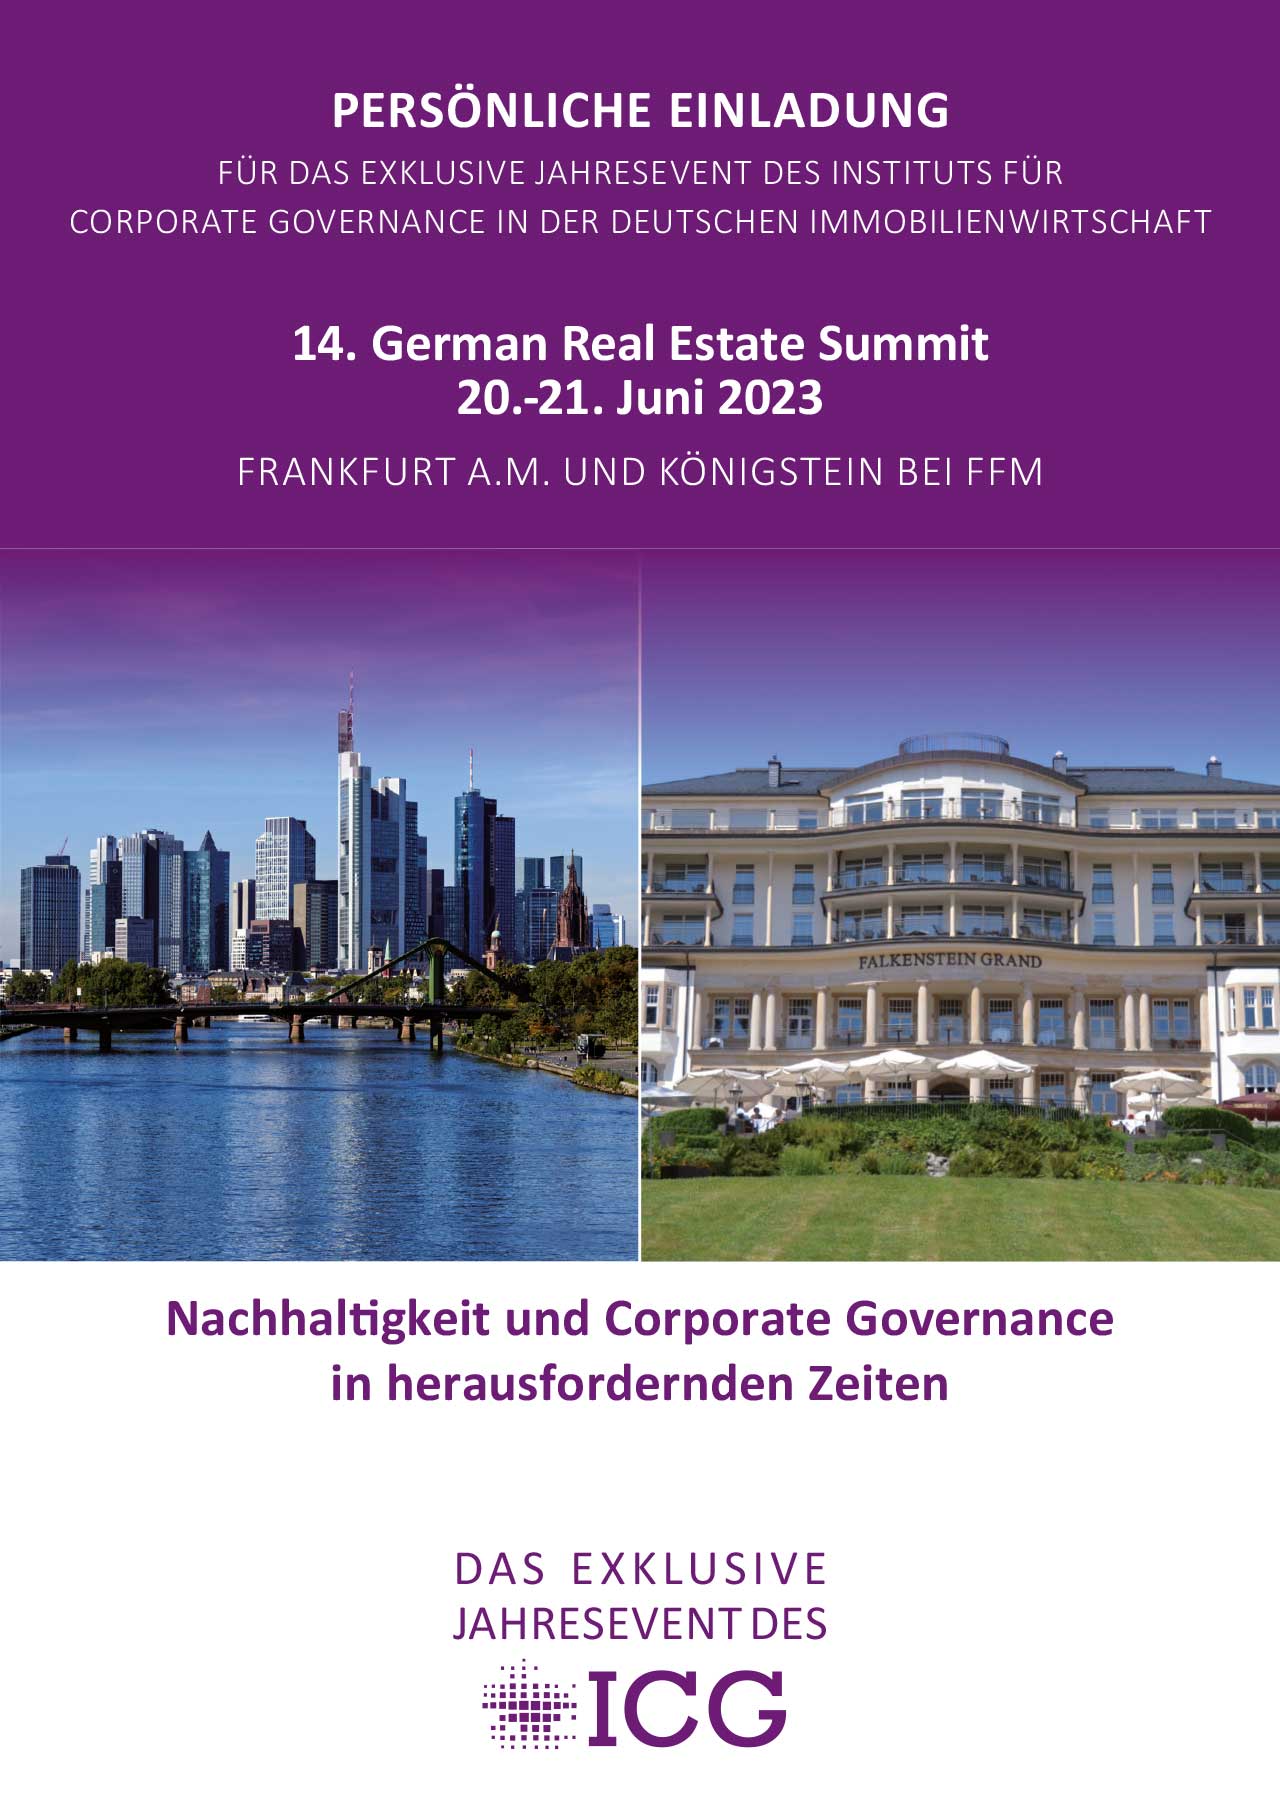 14. German Real Estate Summit - Save the date